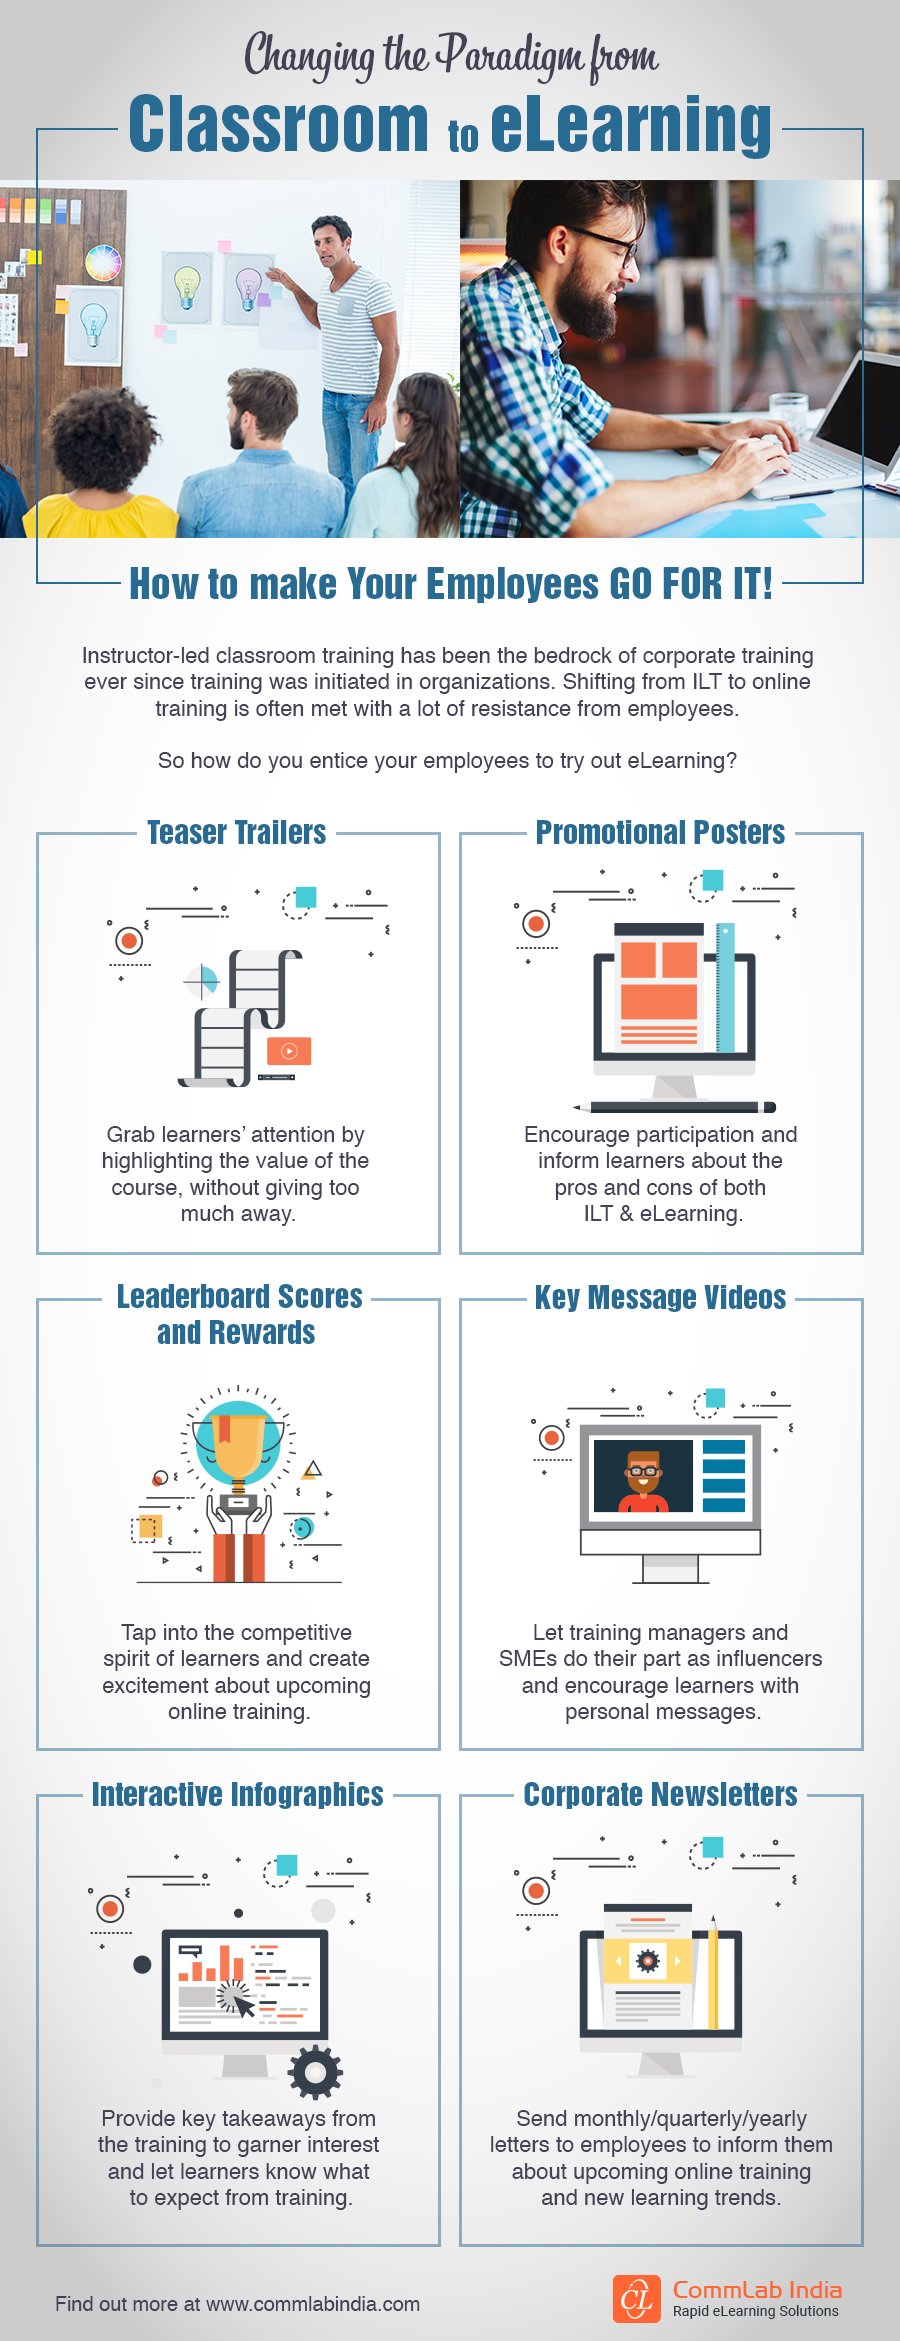 Changing the Paradigm from Classroom to eLearning [Infographic]